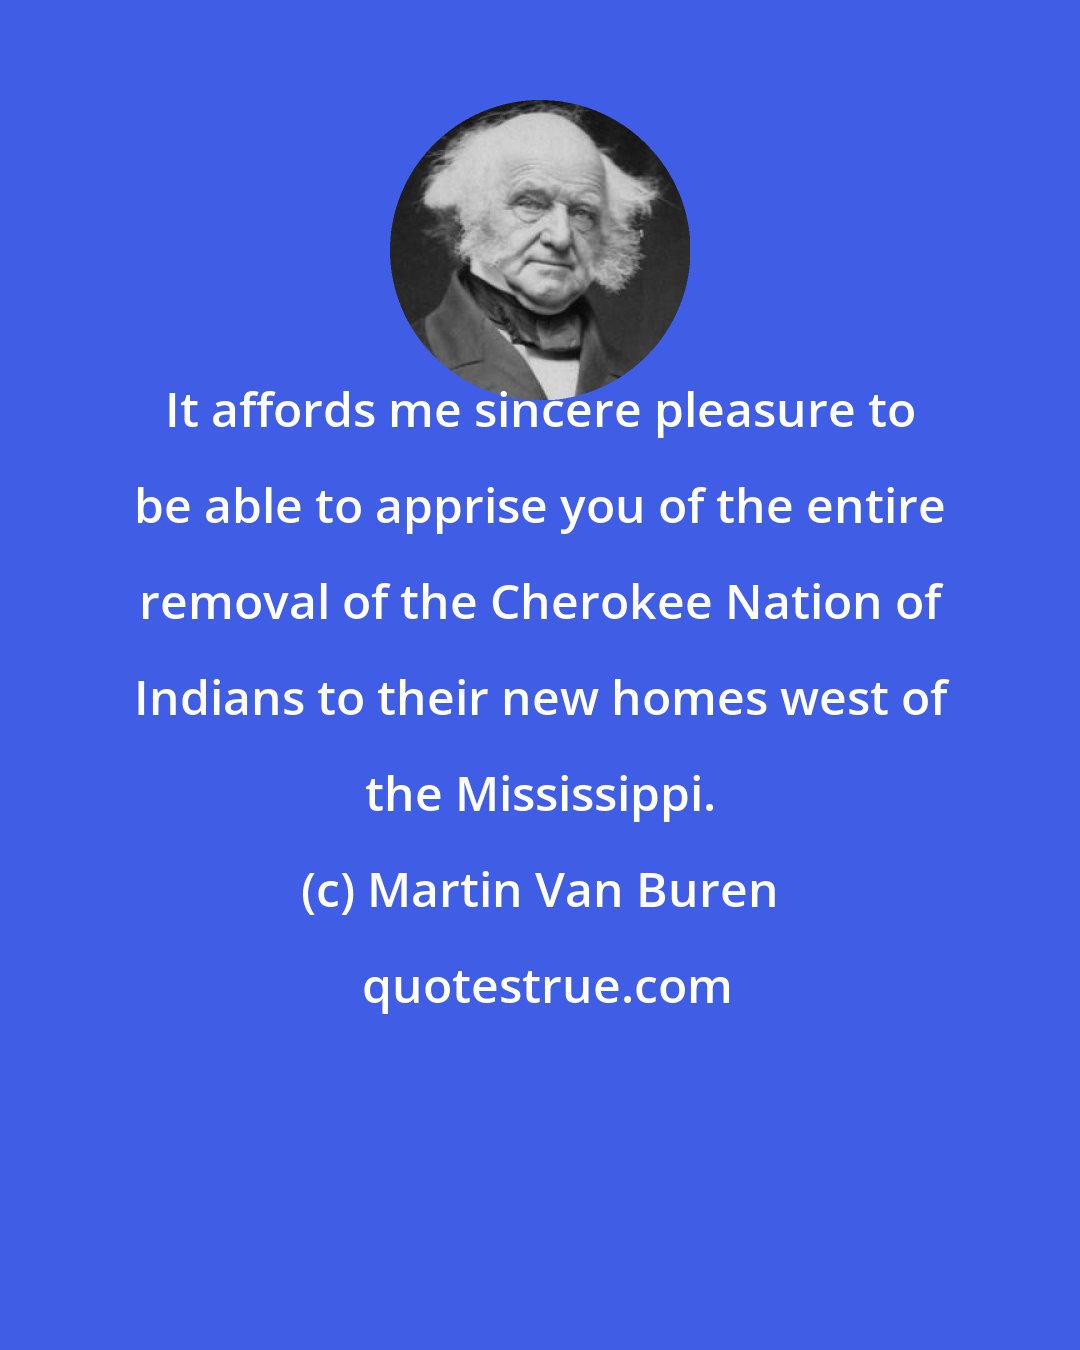 Martin Van Buren: It affords me sincere pleasure to be able to apprise you of the entire removal of the Cherokee Nation of Indians to their new homes west of the Mississippi.